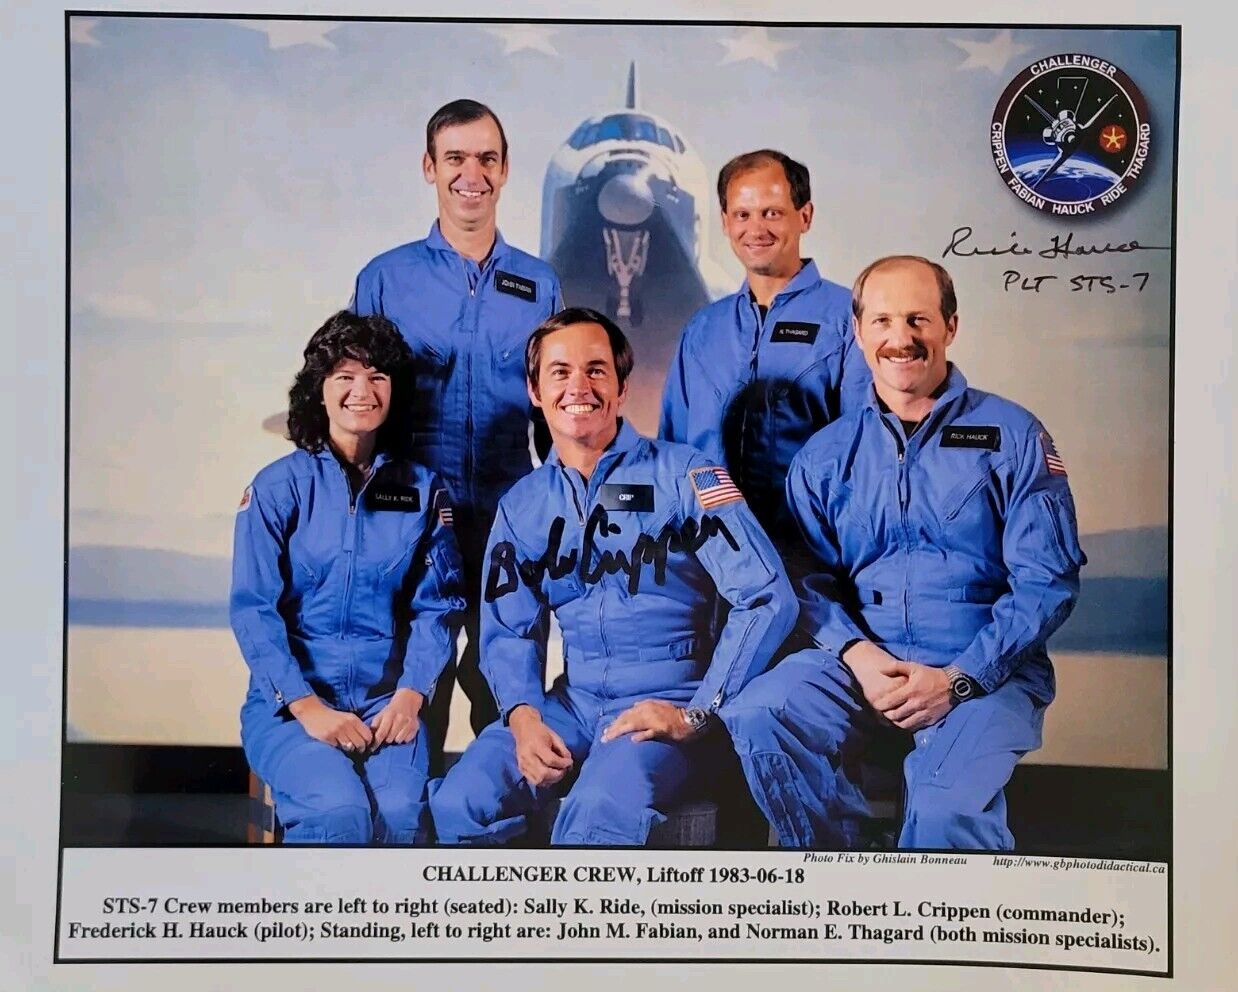 STS-7 SPACE SHUTTLE glossy CREW PHOTO hand SIGNED by astronauts CRIPPEN & HAUCK 